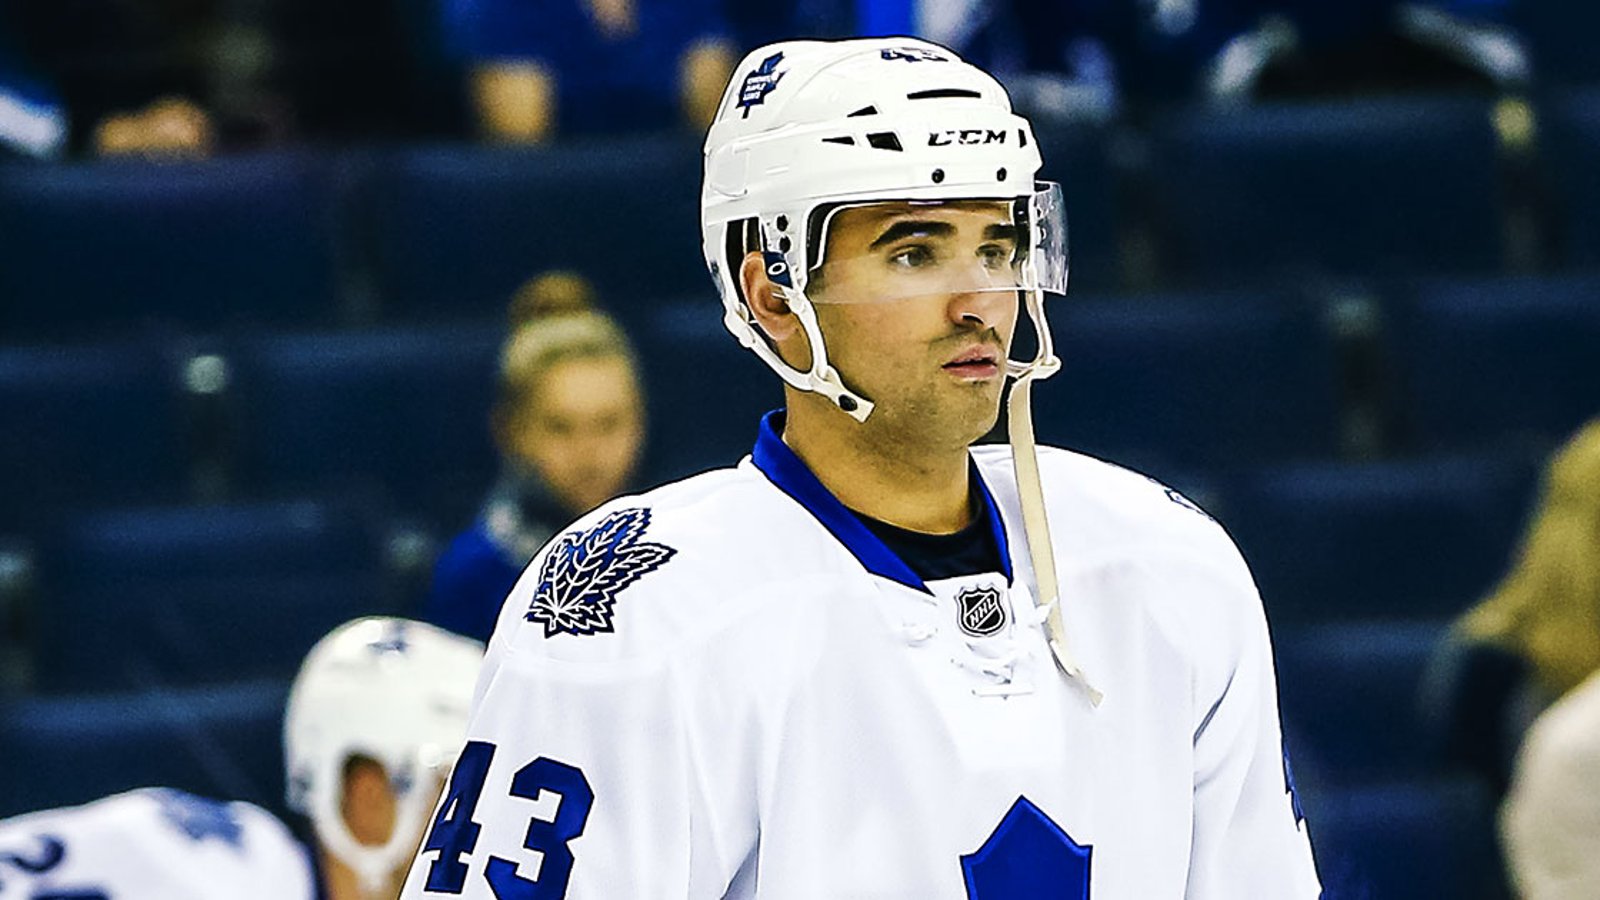 MUST READ: Some stats regarding Kadri and Gardiner should give you some faith.